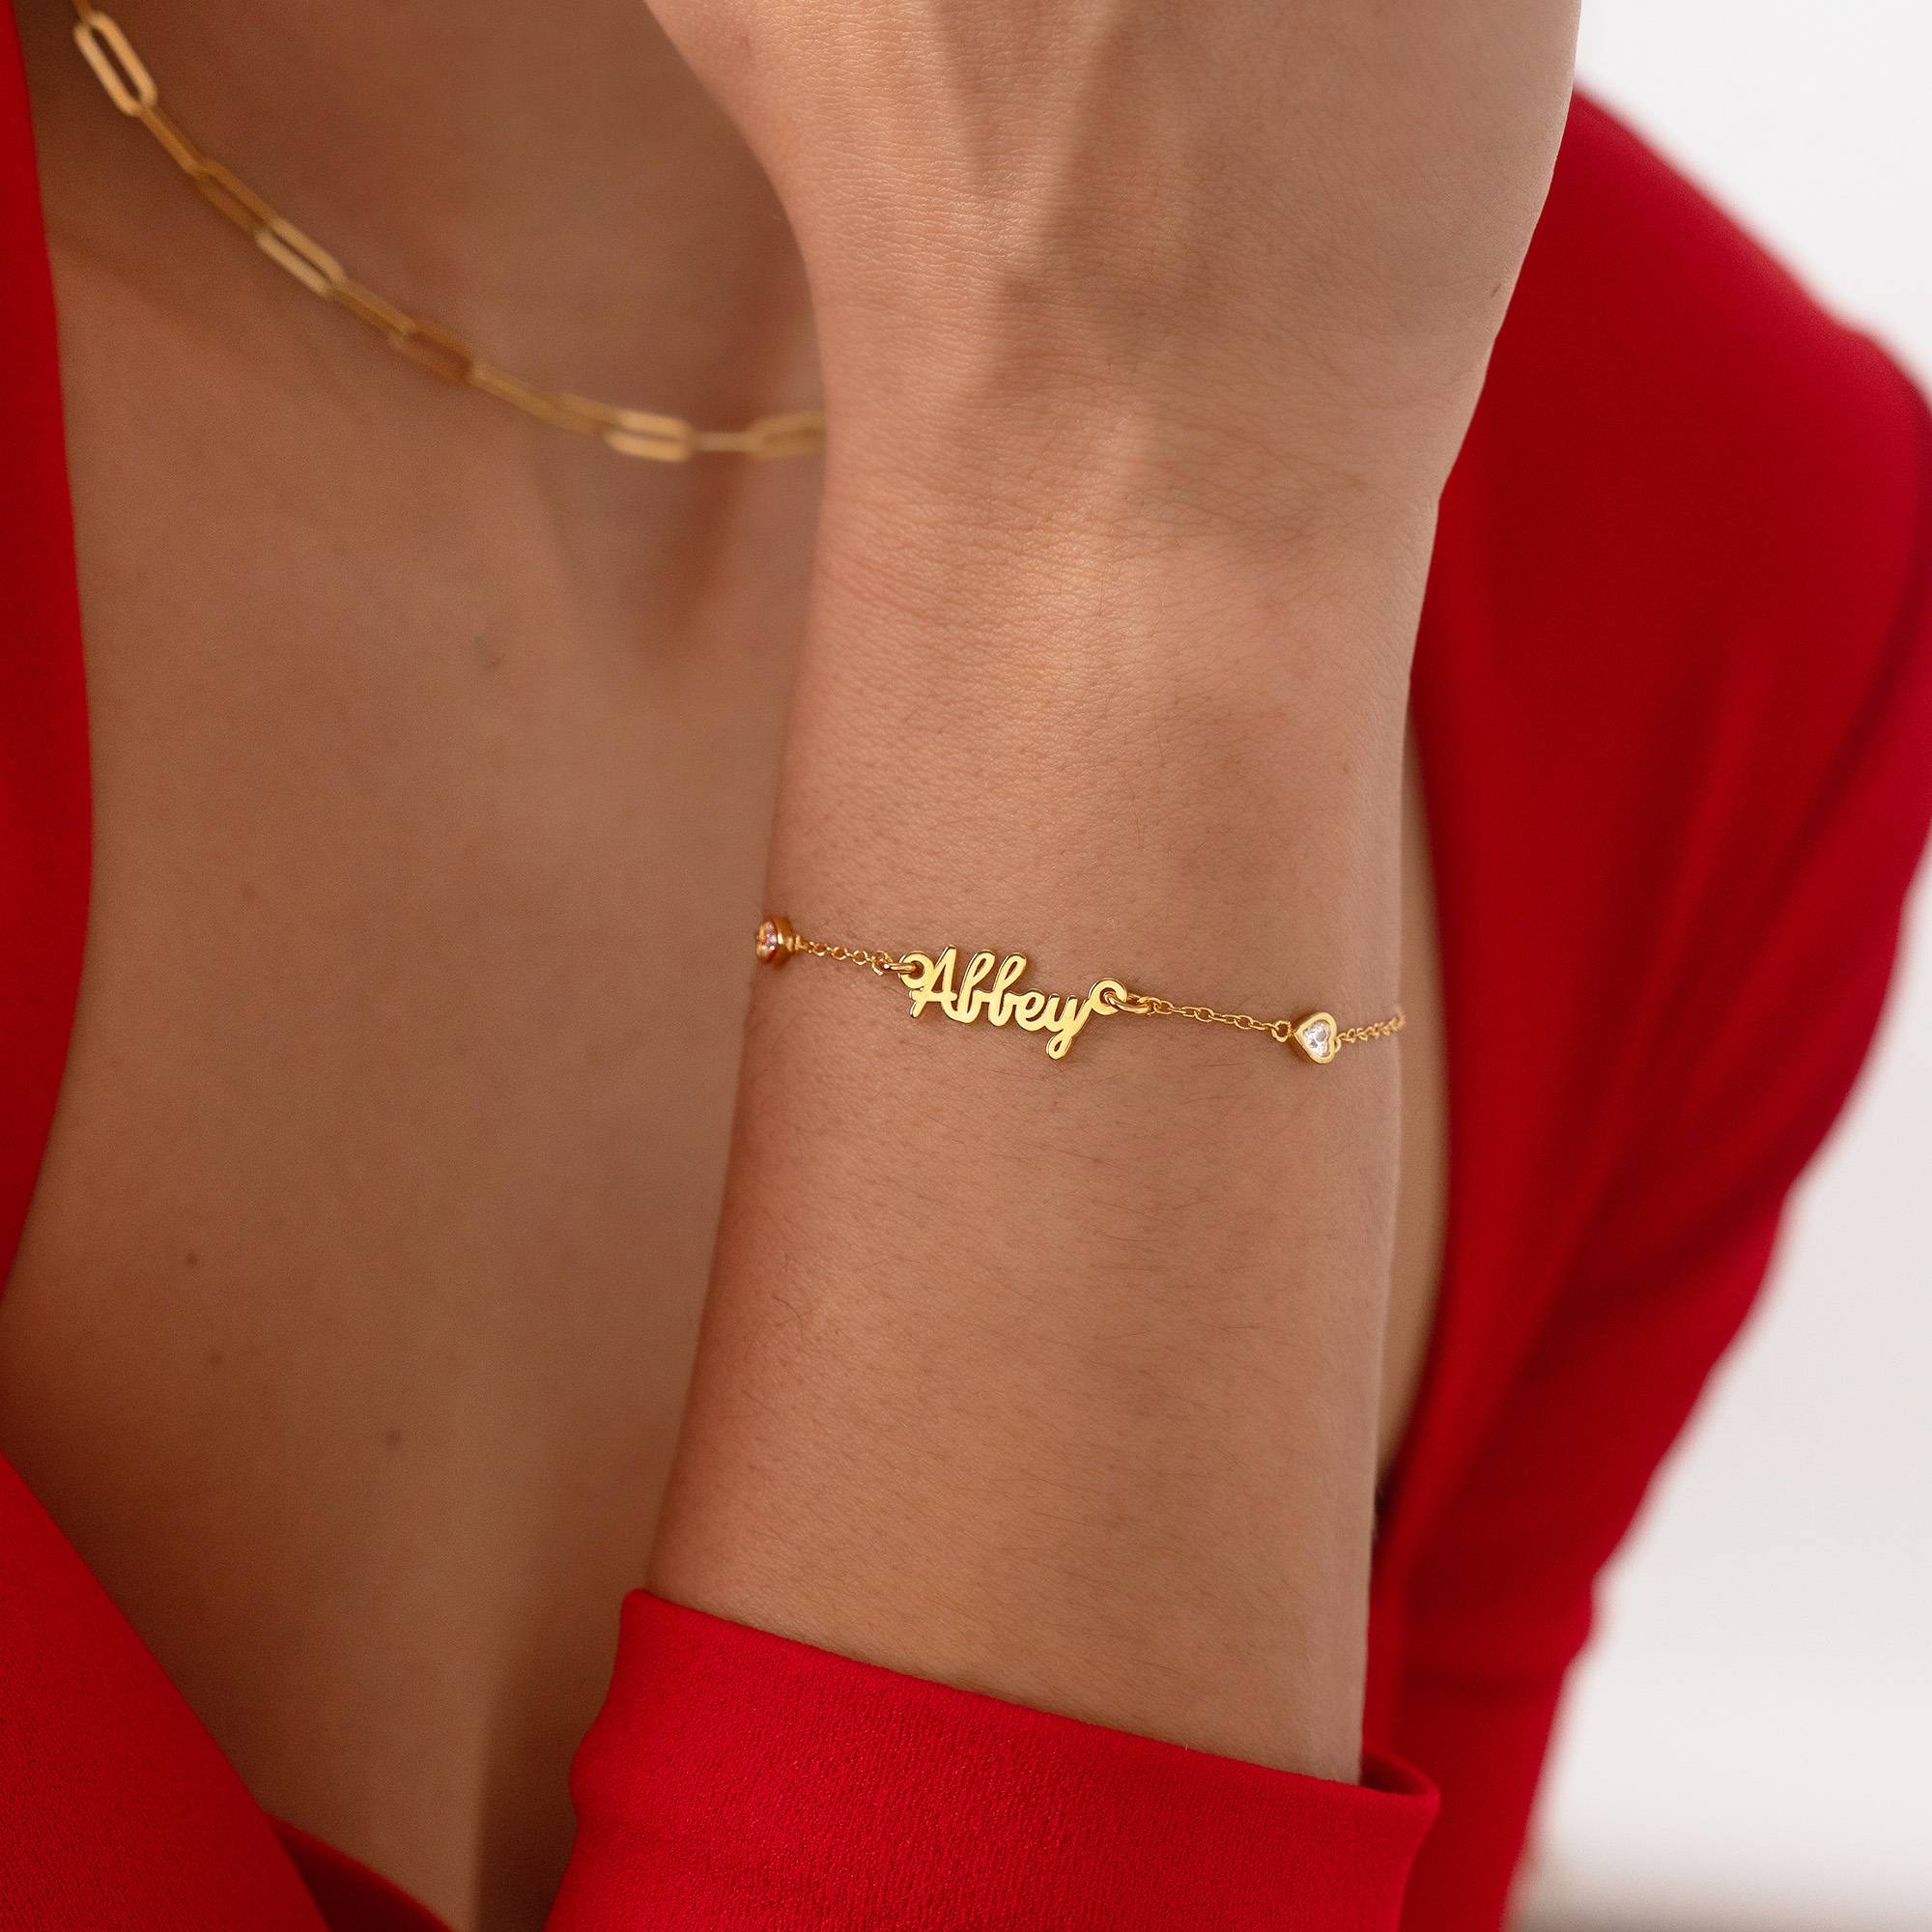 Charli Heart Chain Name Bracelet in 18ct Gold Vermeil-2 product photo